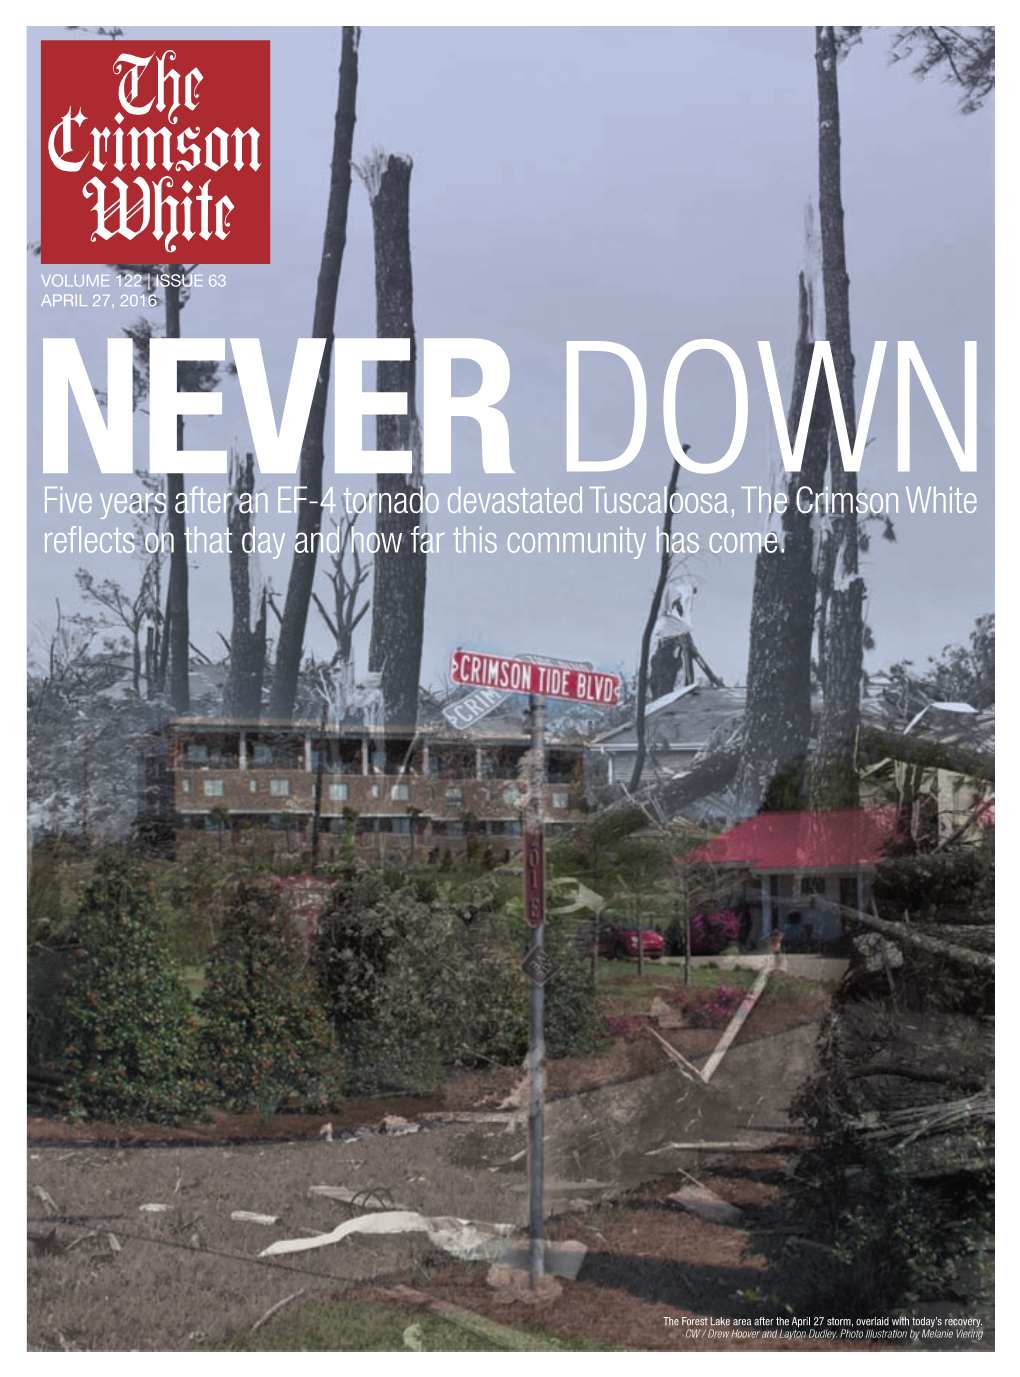 Five Years After an EF-4 Tornado Devastated Tuscaloosa, the Crimson White Refl Ects on That Day and How Far This Community Has Come